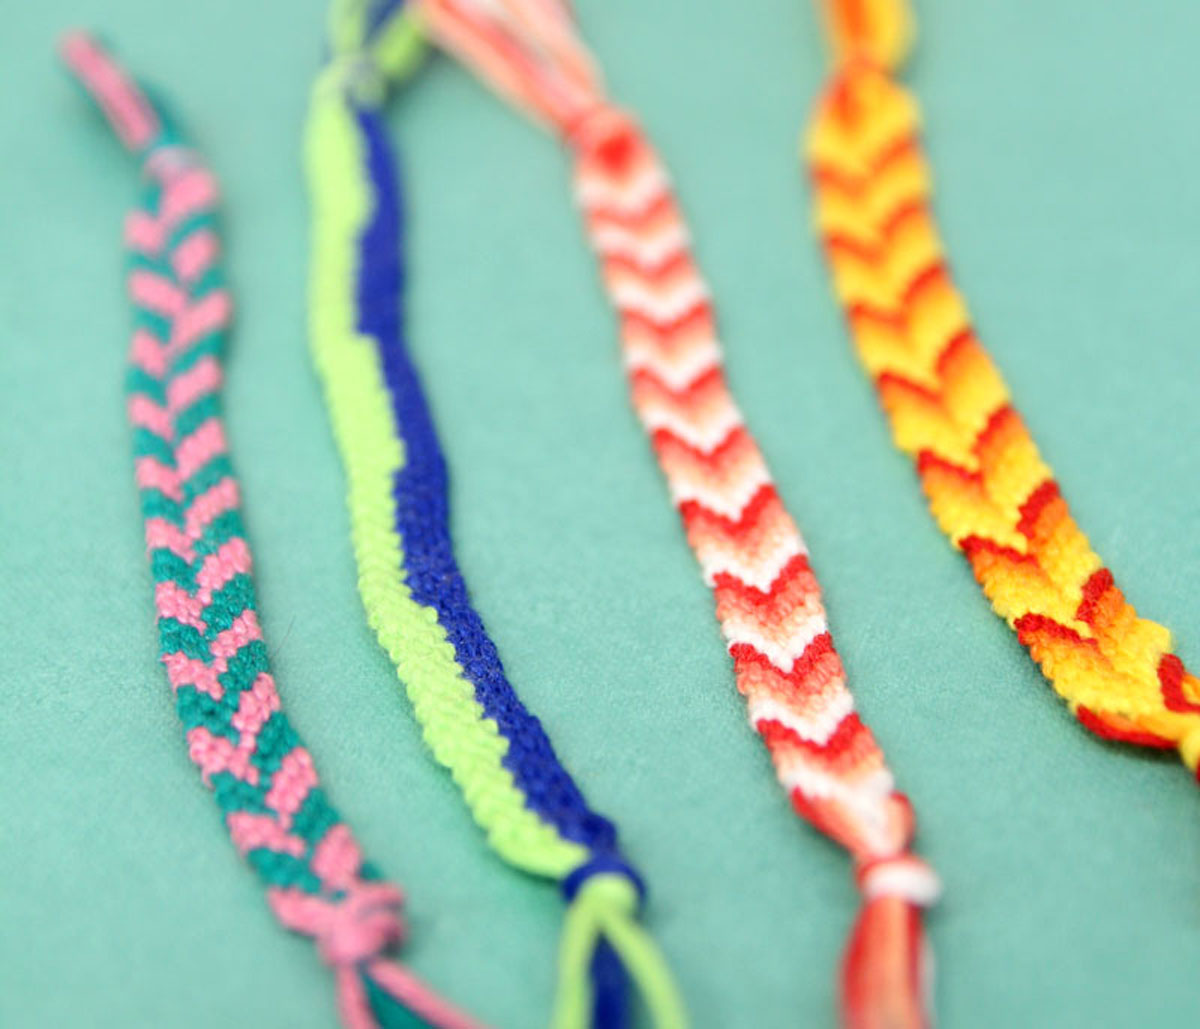 3 Ways to Make Bracelets out of Thread - wikiHow